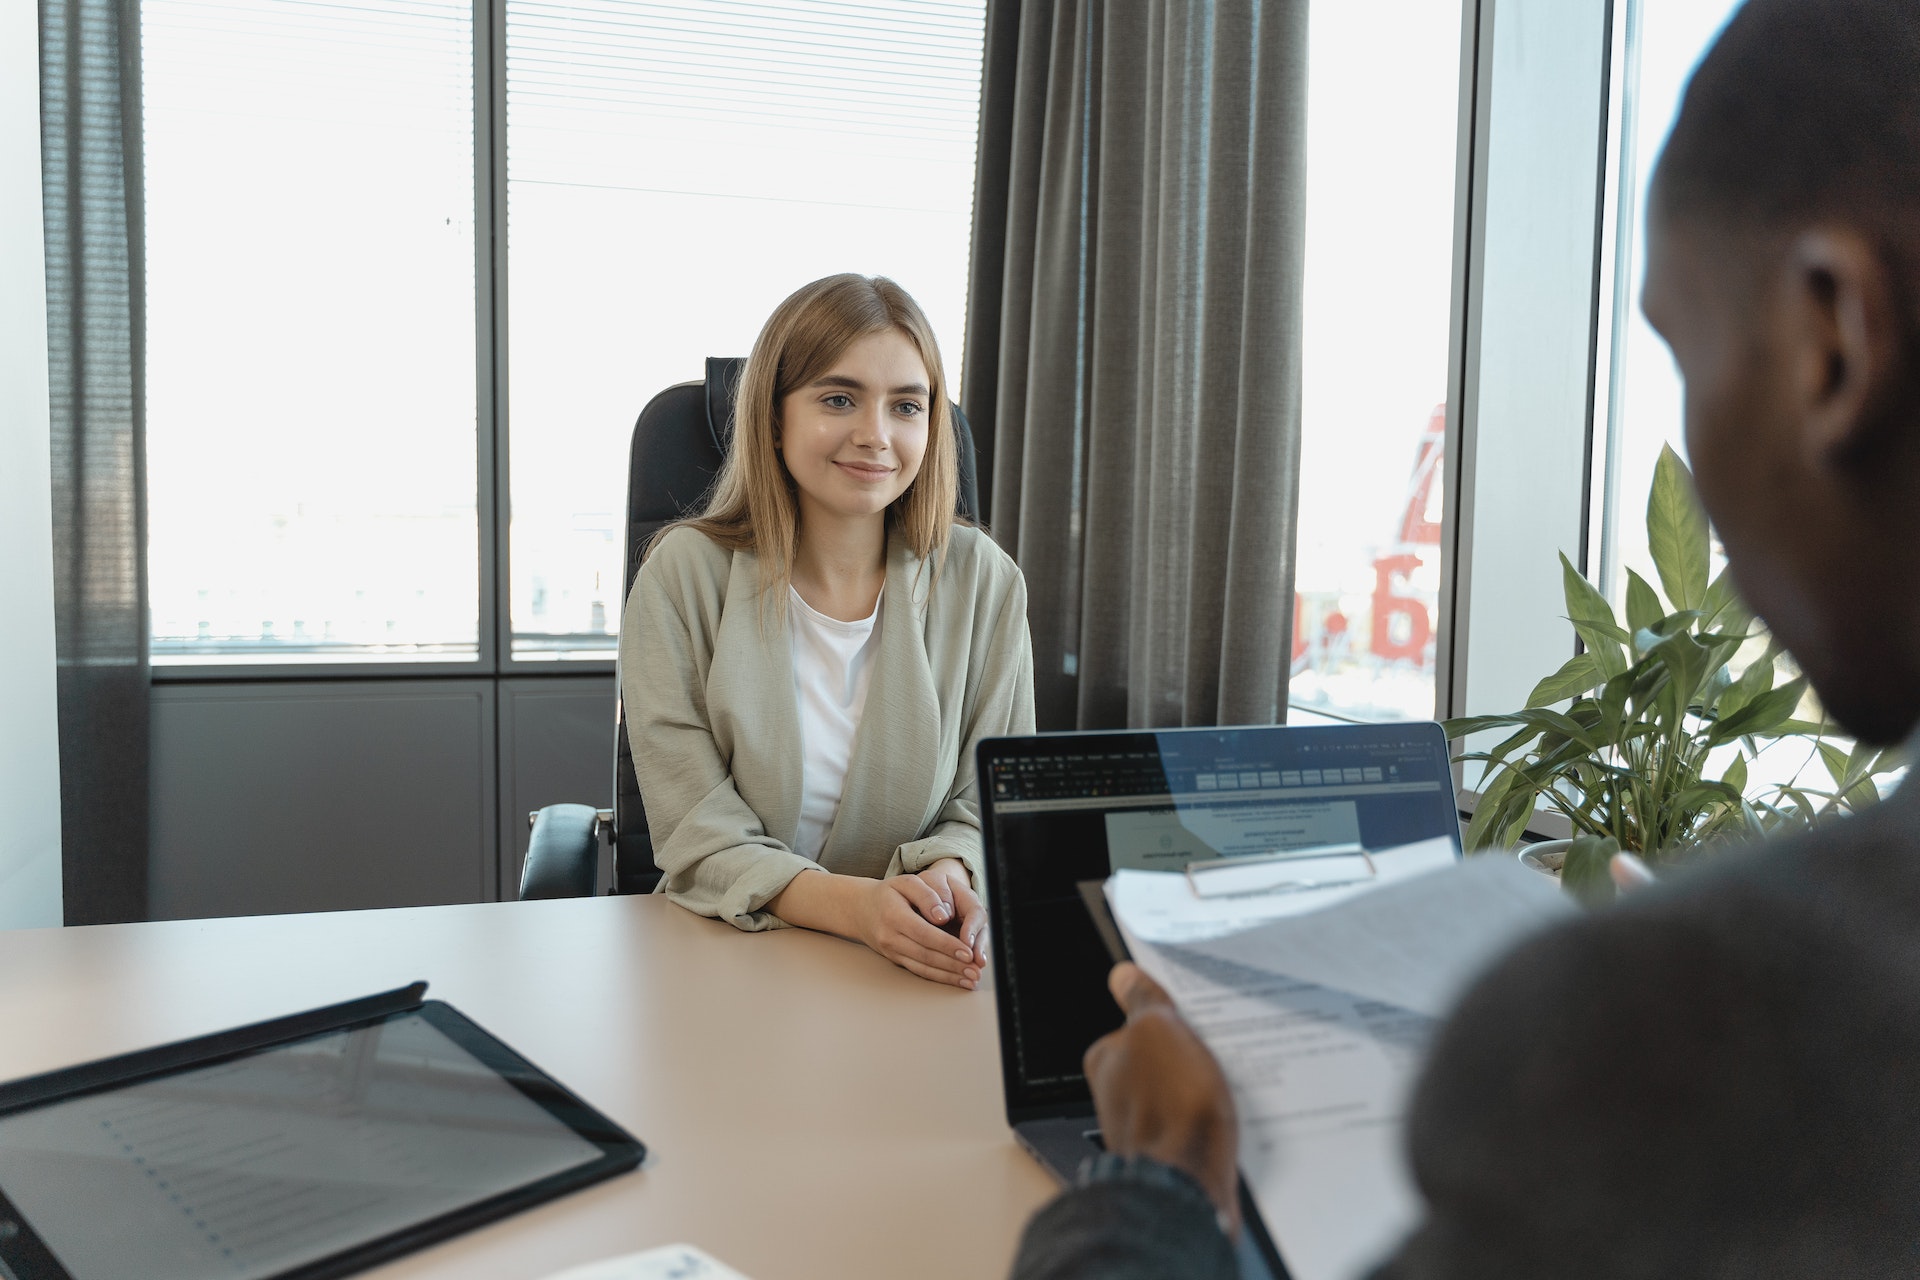 A woman is being interviewed for an administrative assistant role.